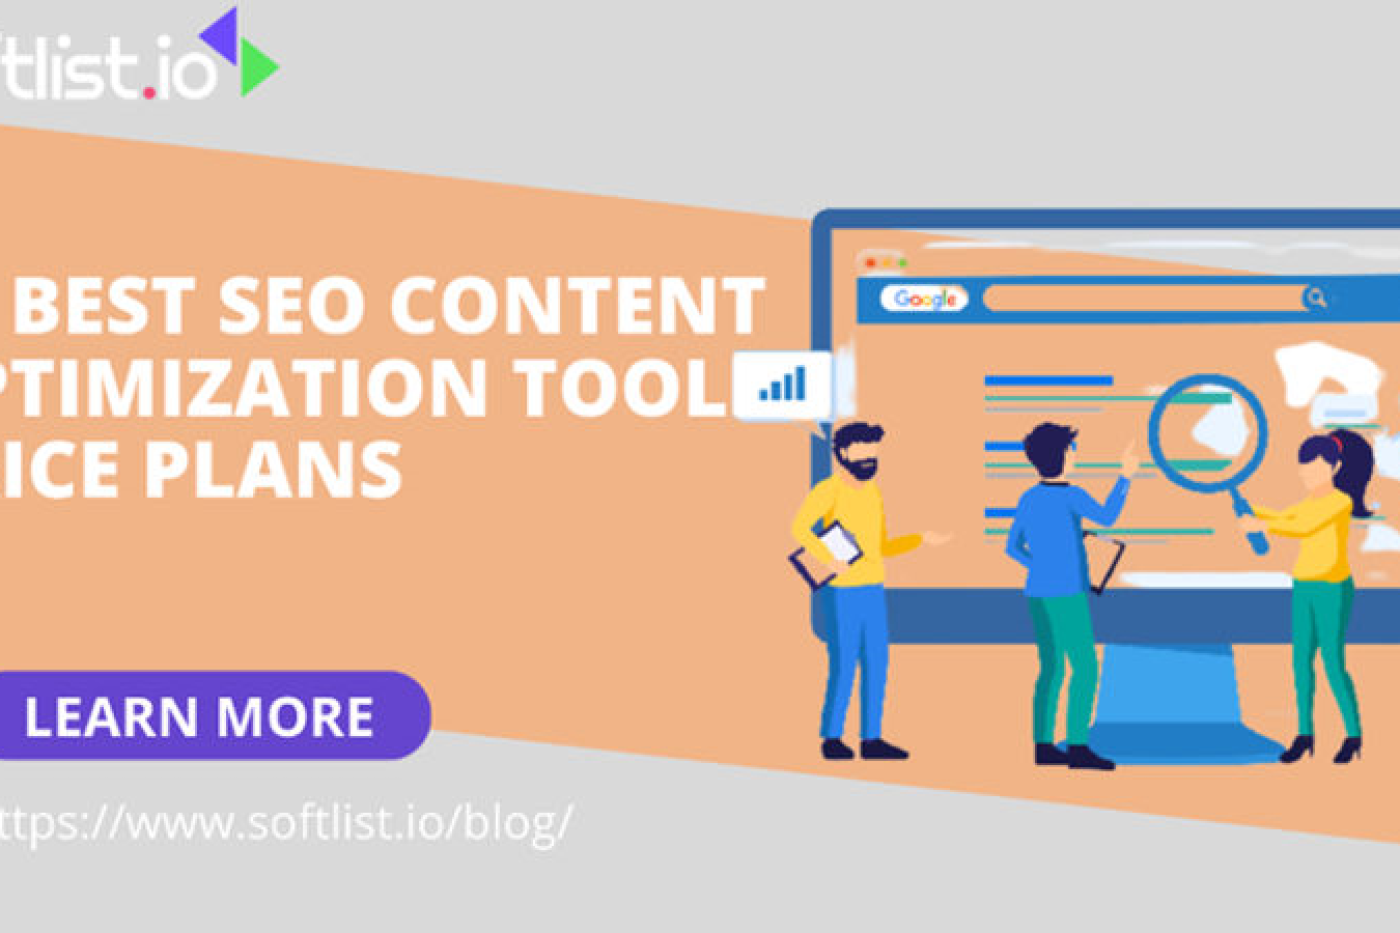 17 Best SEO Content Optimization Plans for Every Budget